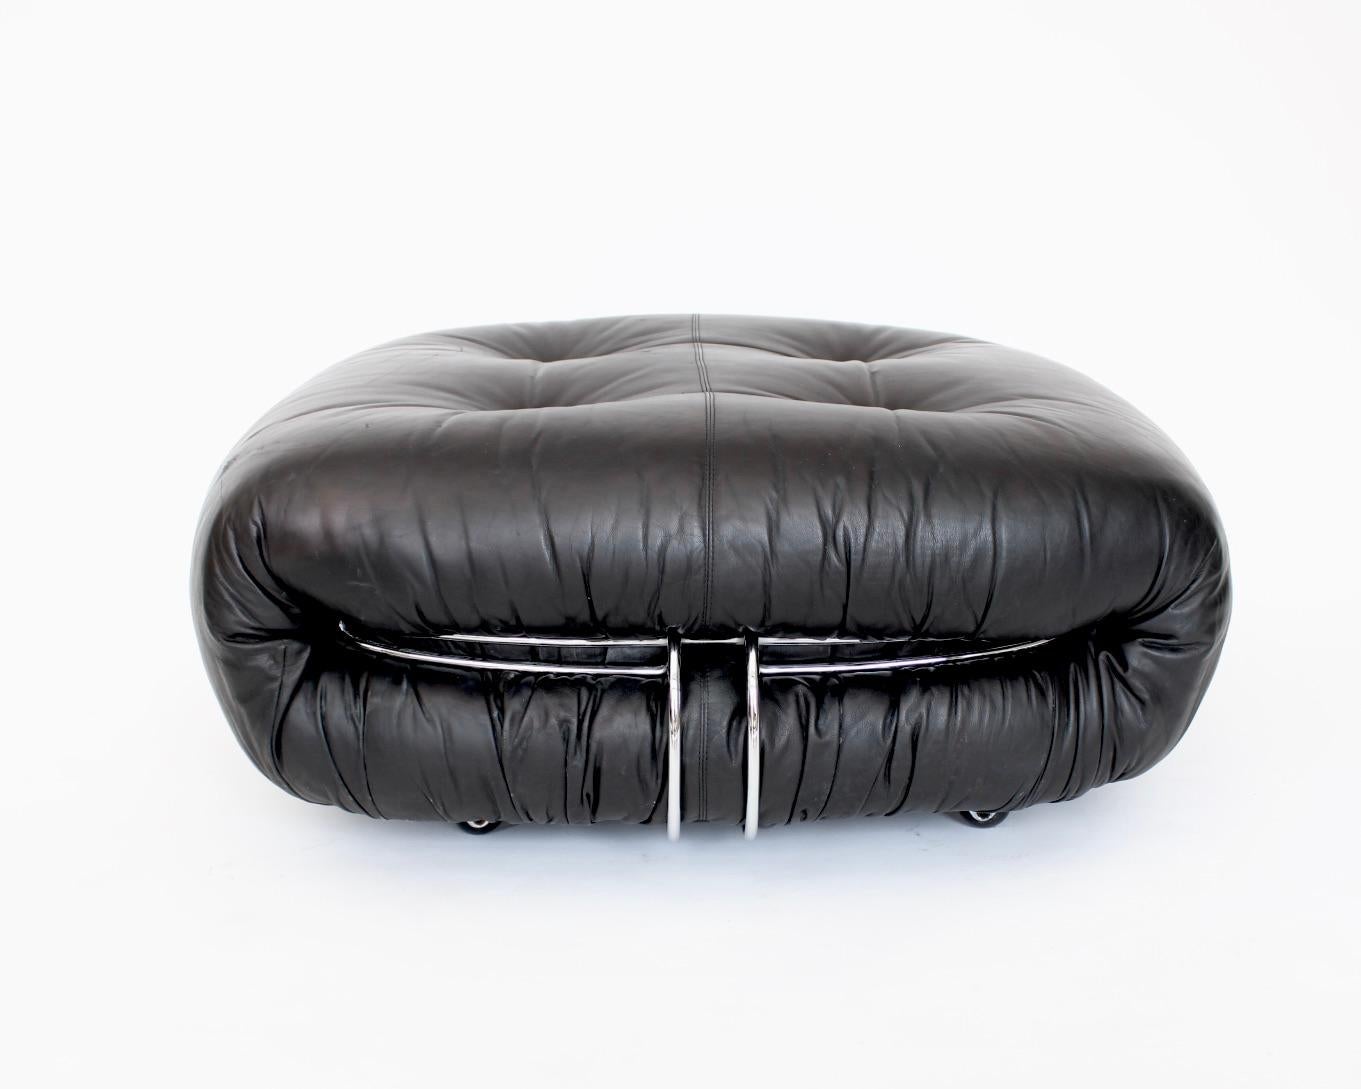 Afra and Toba Scarpa Soriana Cassina Pouf or Ottoman c1970s;  Modern; Italian Original black leather in excellent condition.  The ottoman can be easily moved around since it has castors attached to the underside. The Soriana collection was meant to